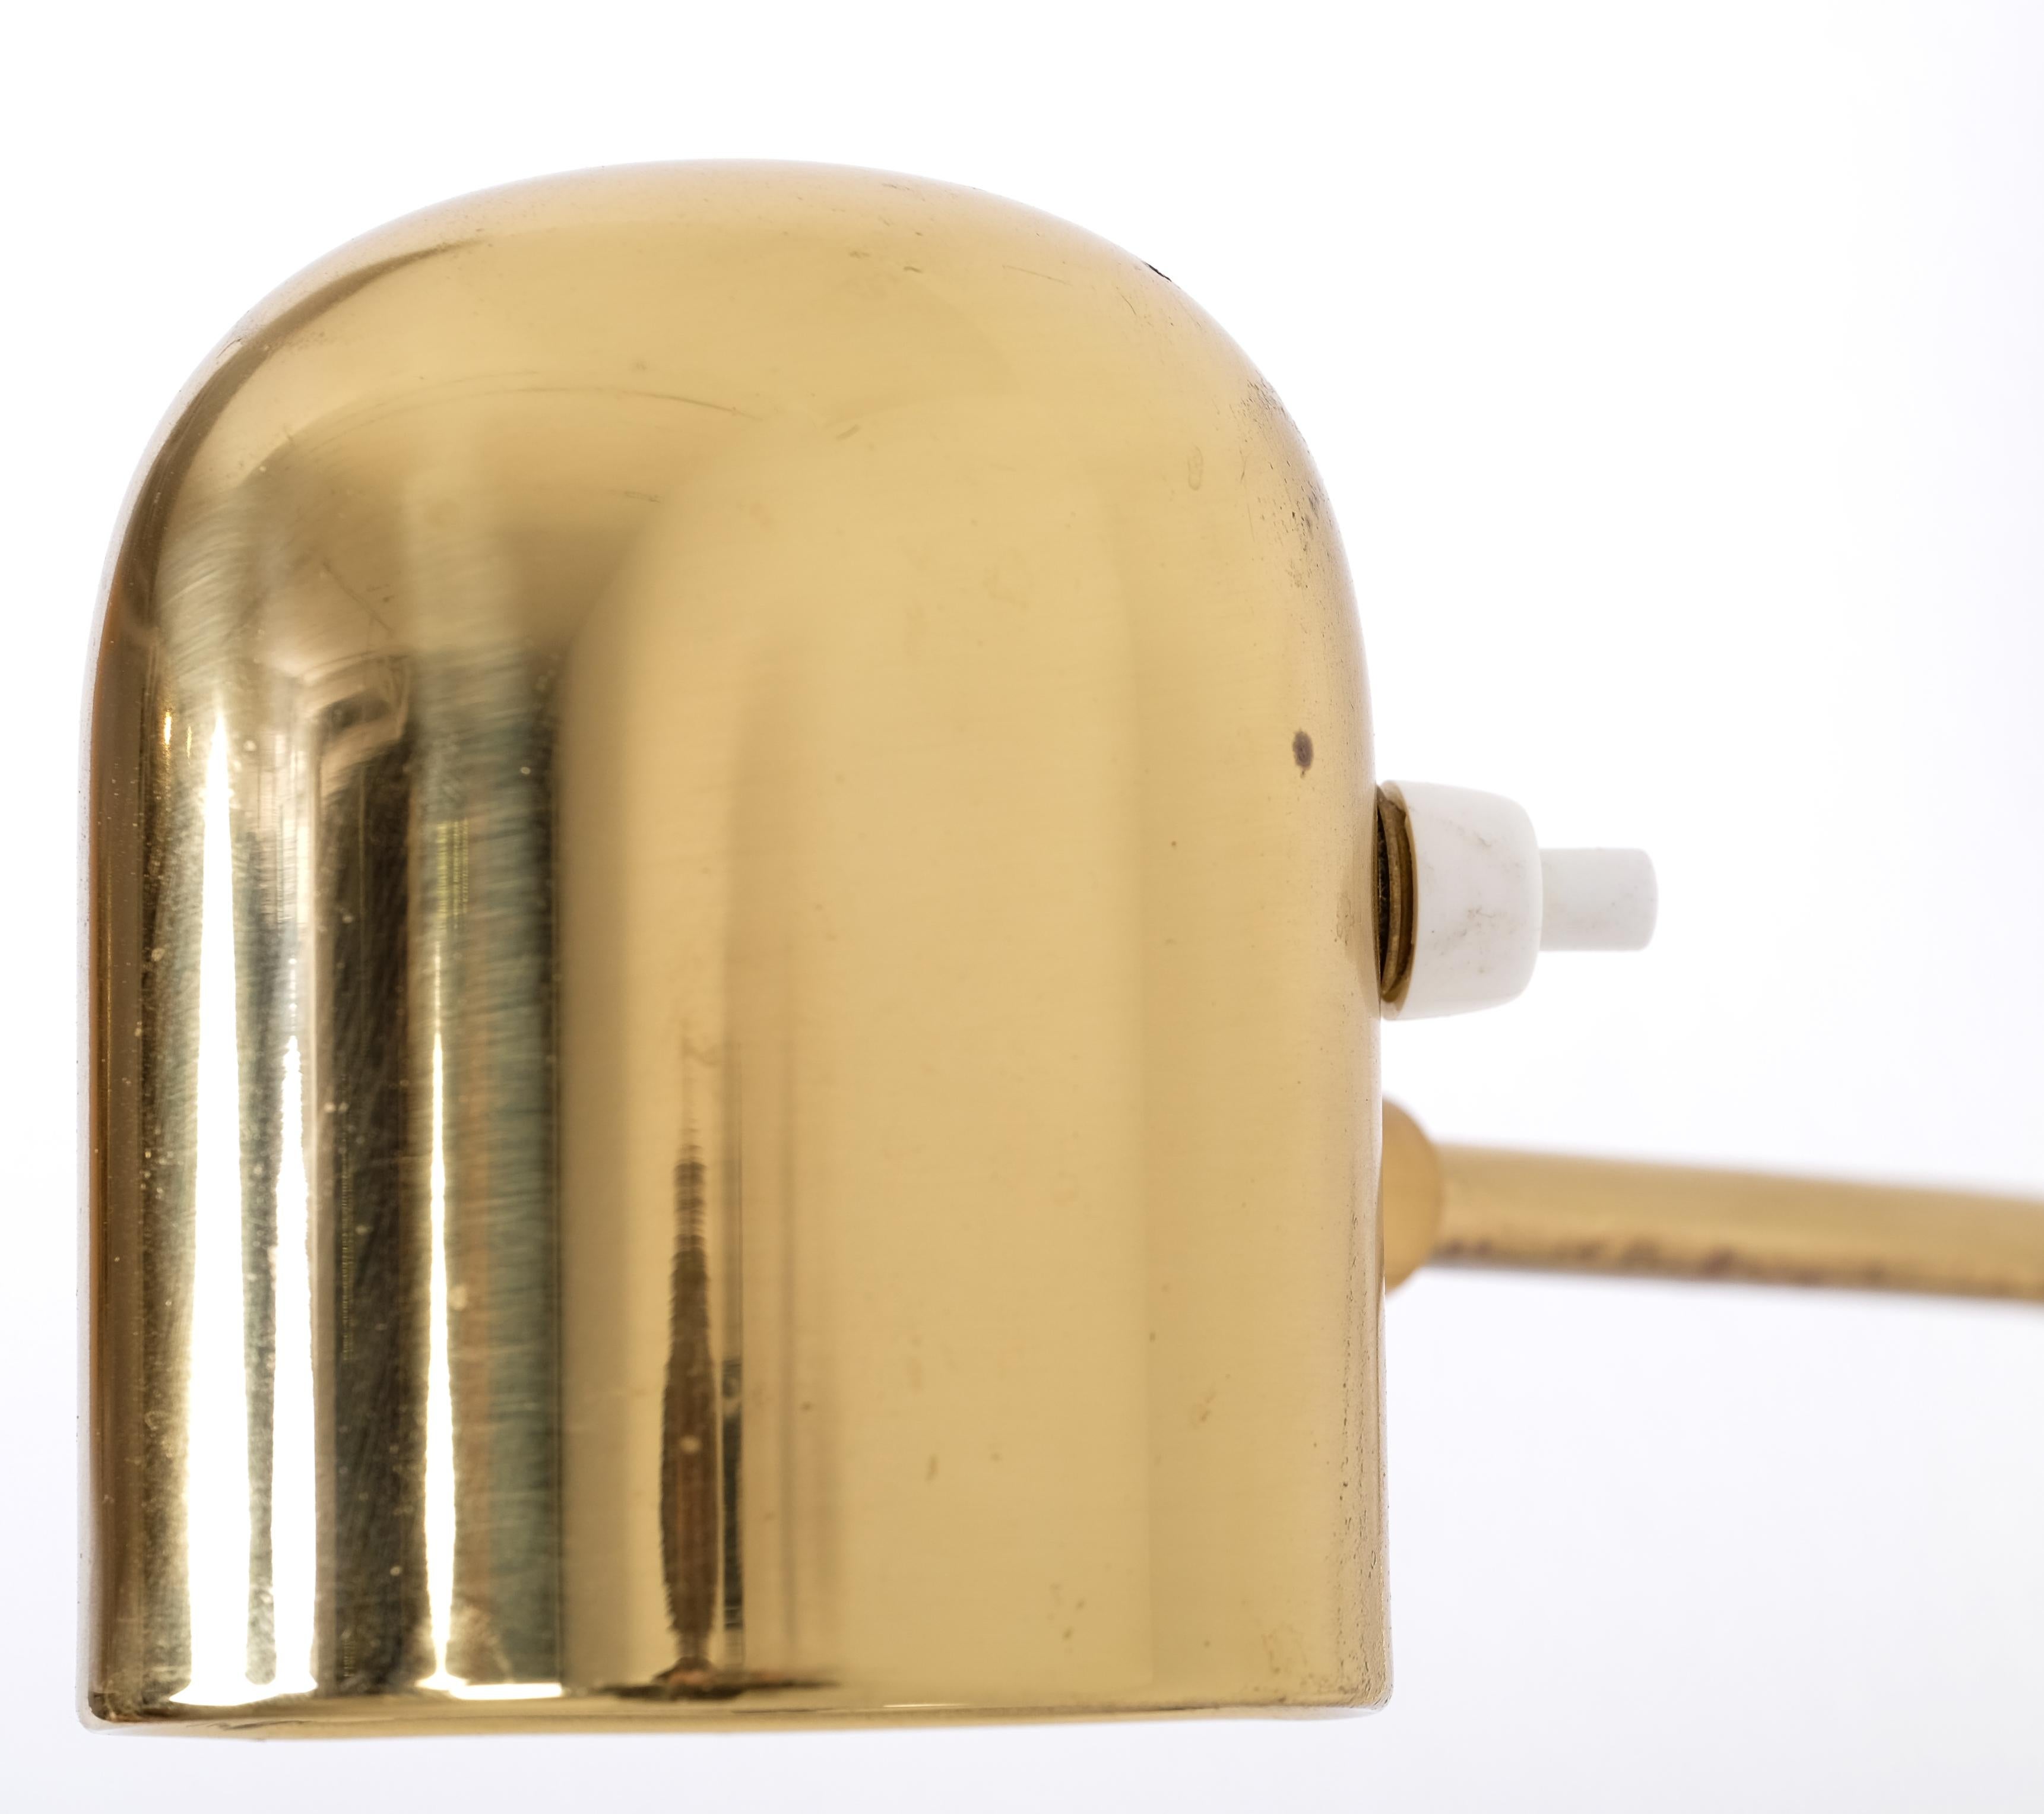 Set of 8 Brass Wall Lamps, Bergboms, Sweden, 1970s For Sale 1